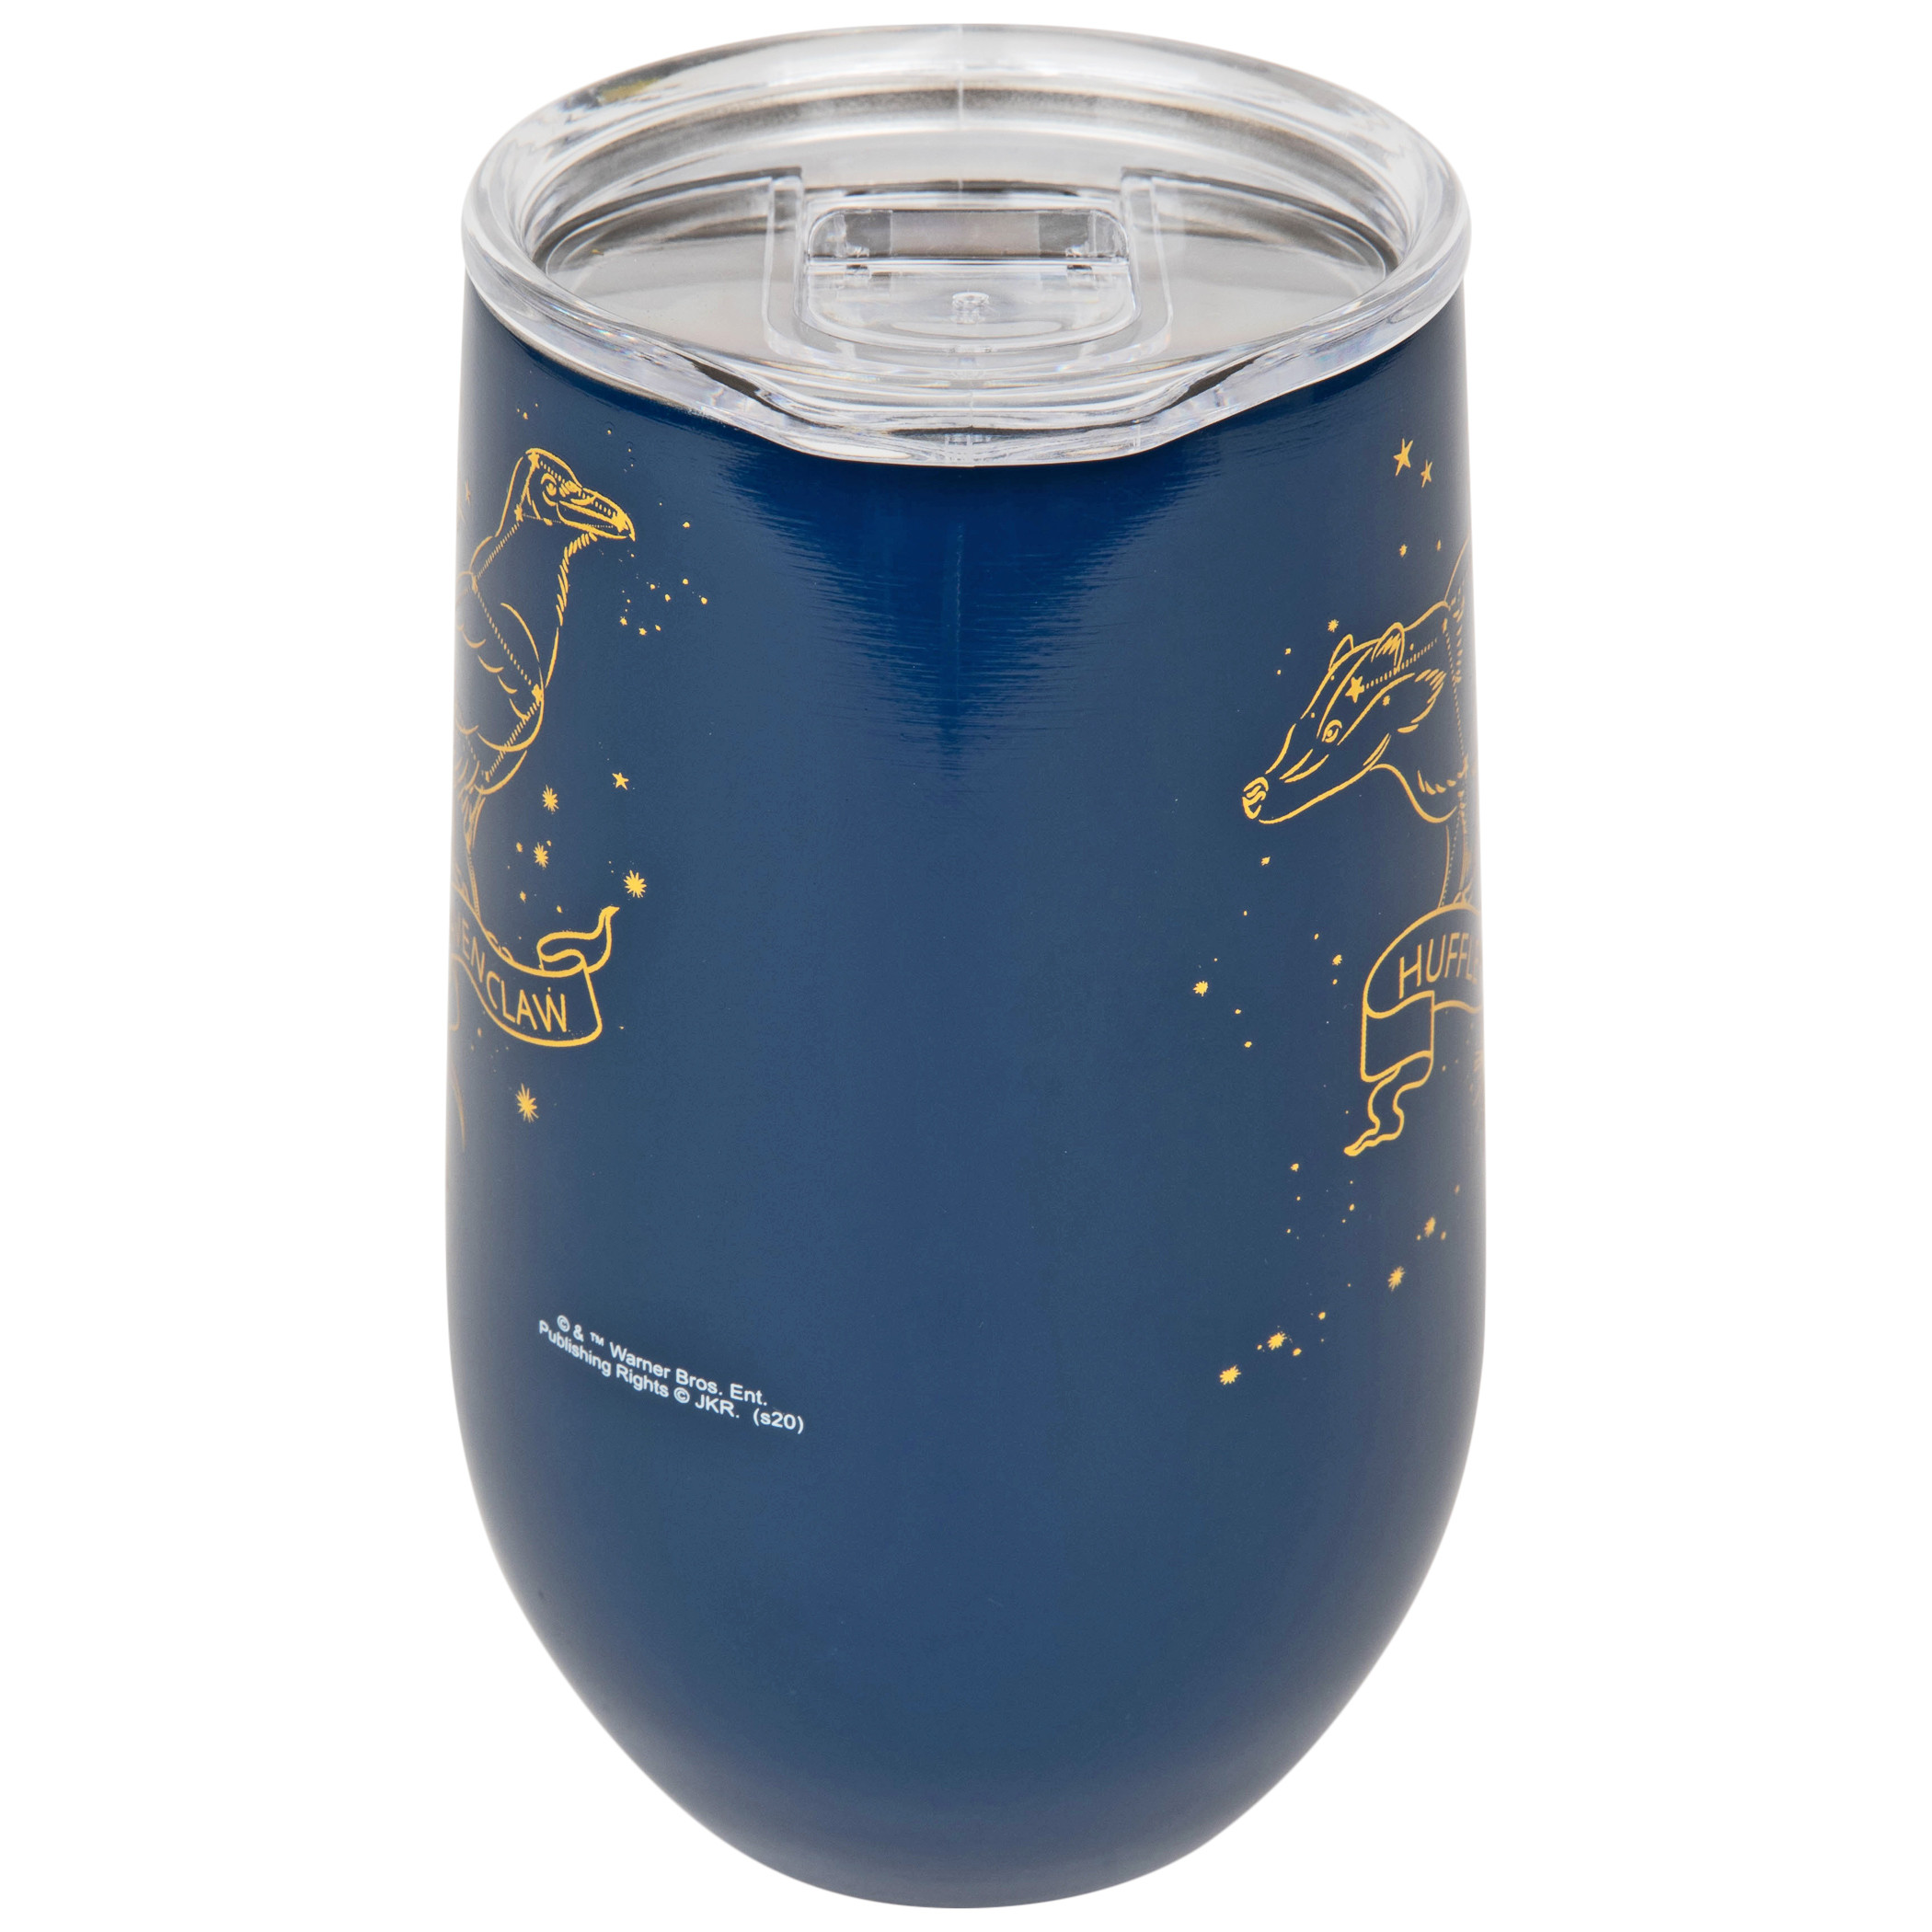 Harry Potter Hogwarts All Houses Constellations 16oz Wine Tumbler